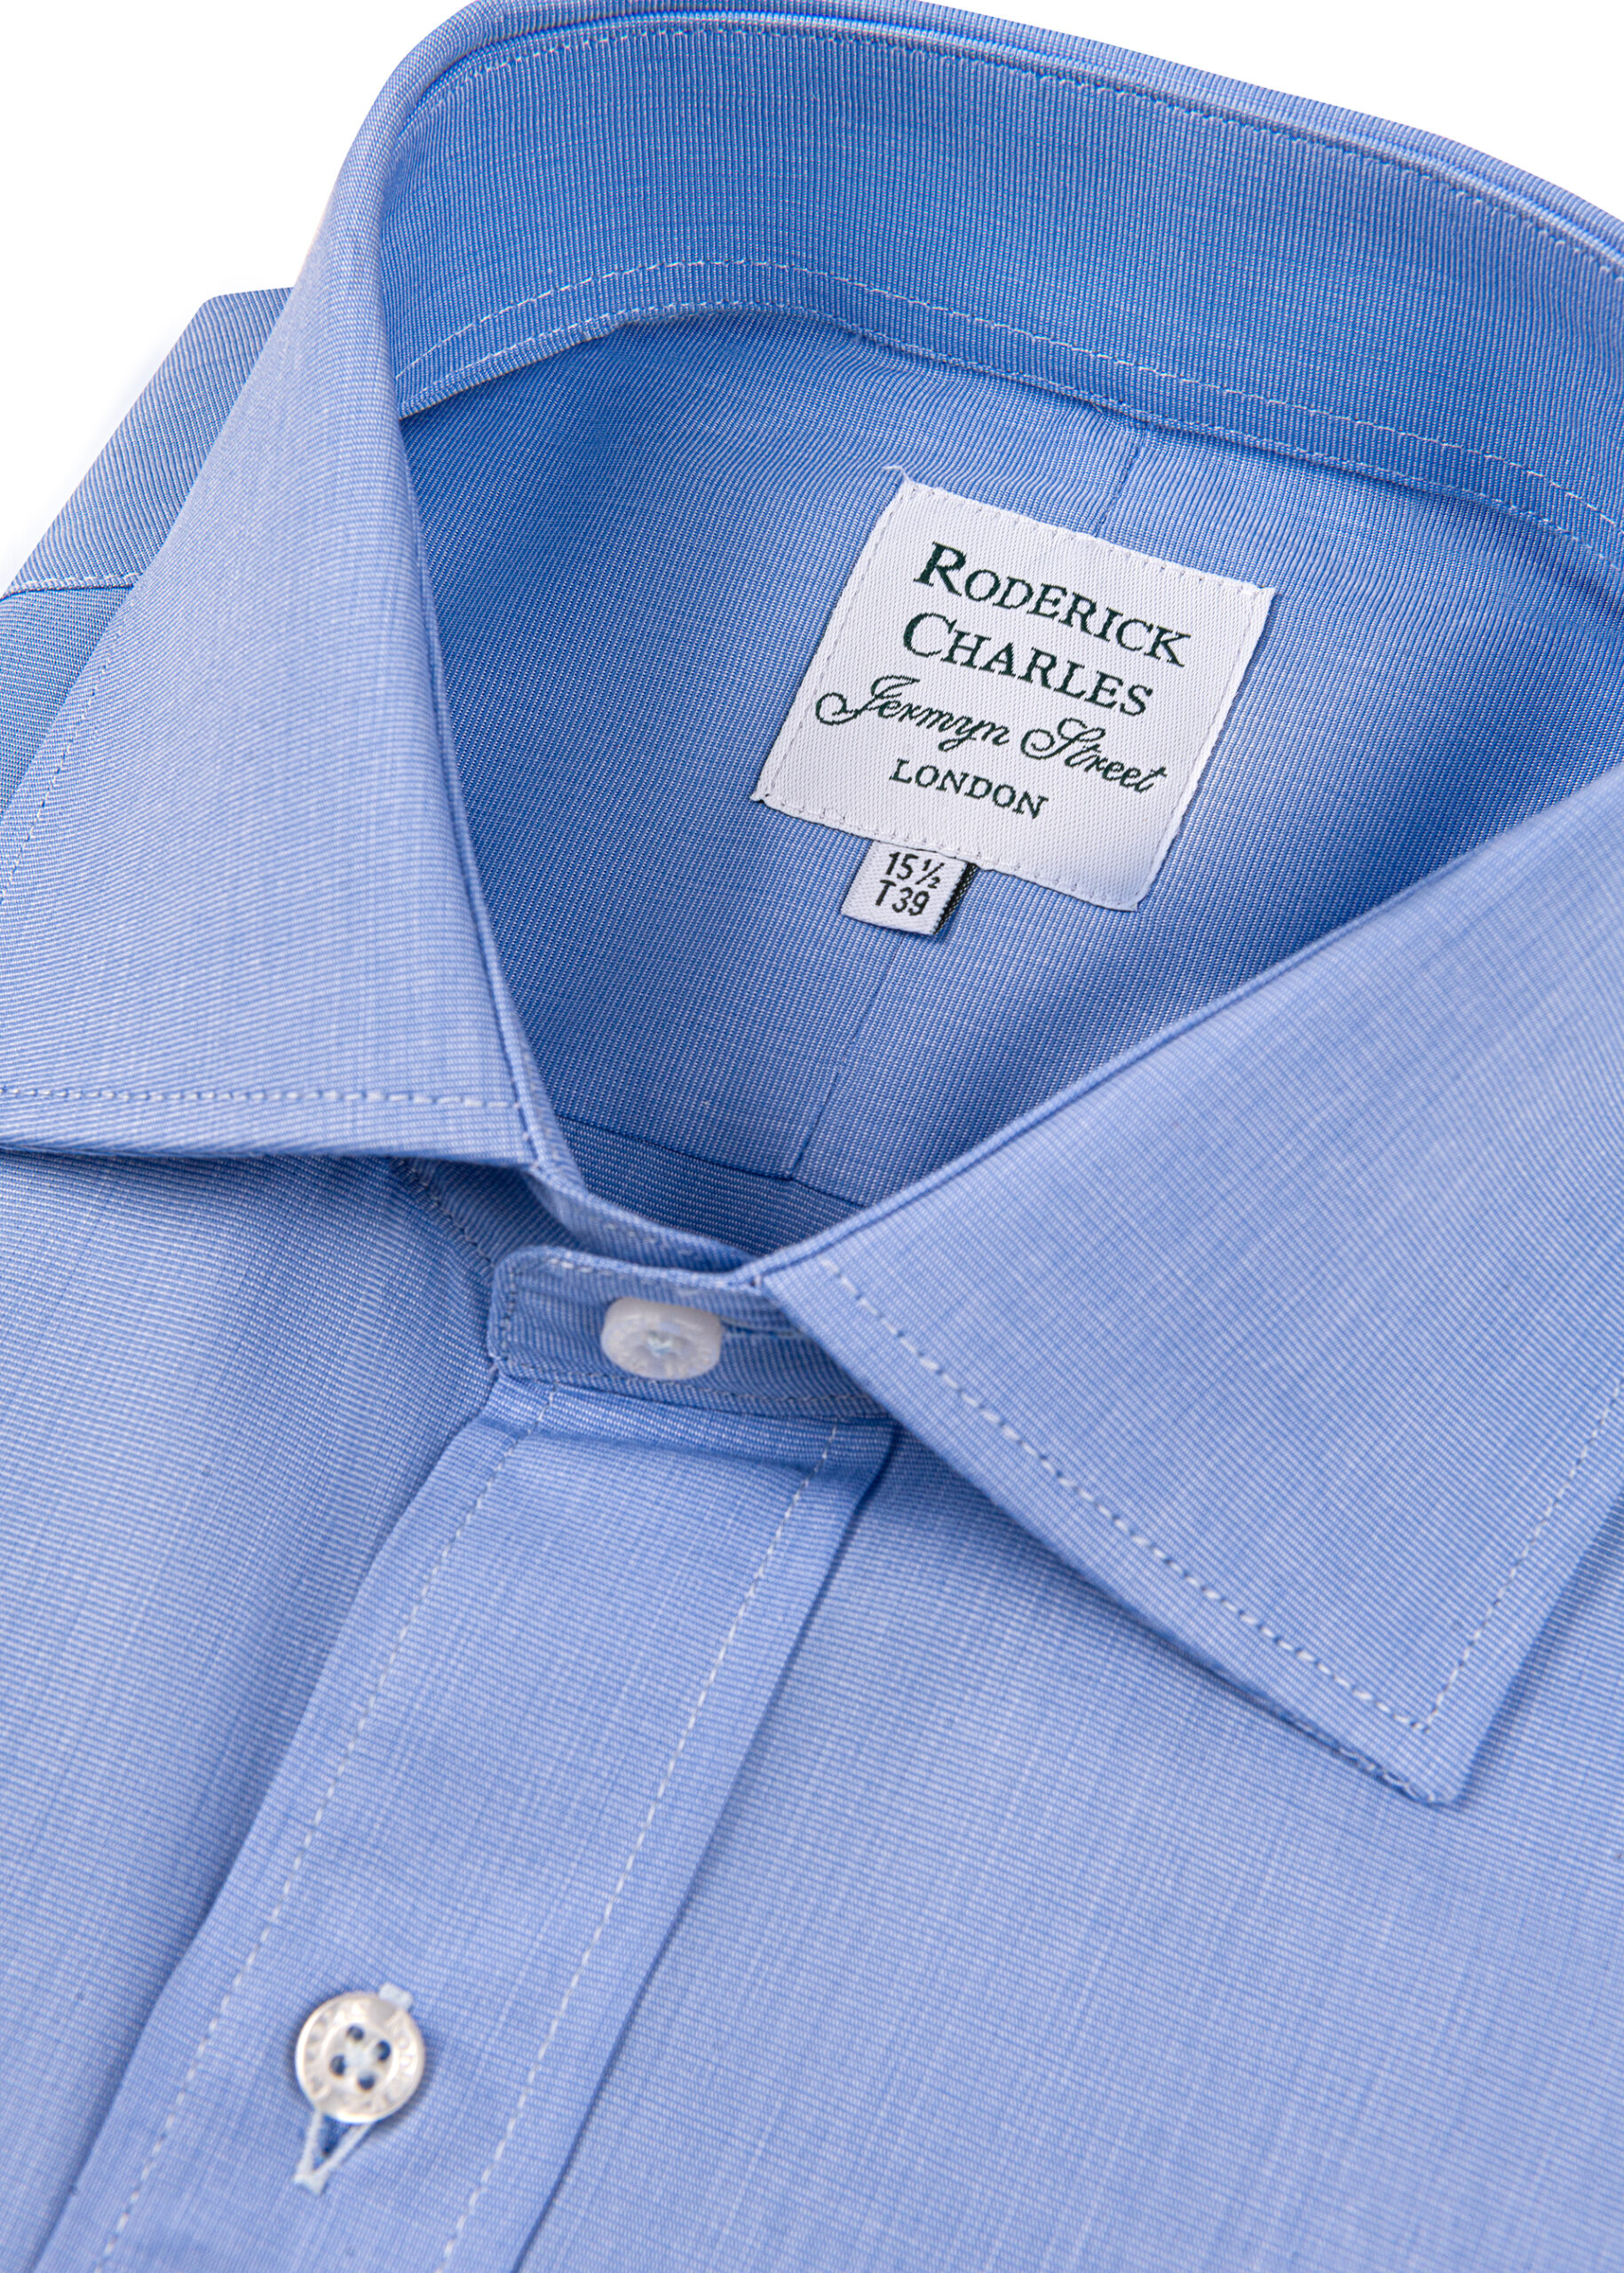 Double Cuff Blue End On End Shirt - Roderick Charles